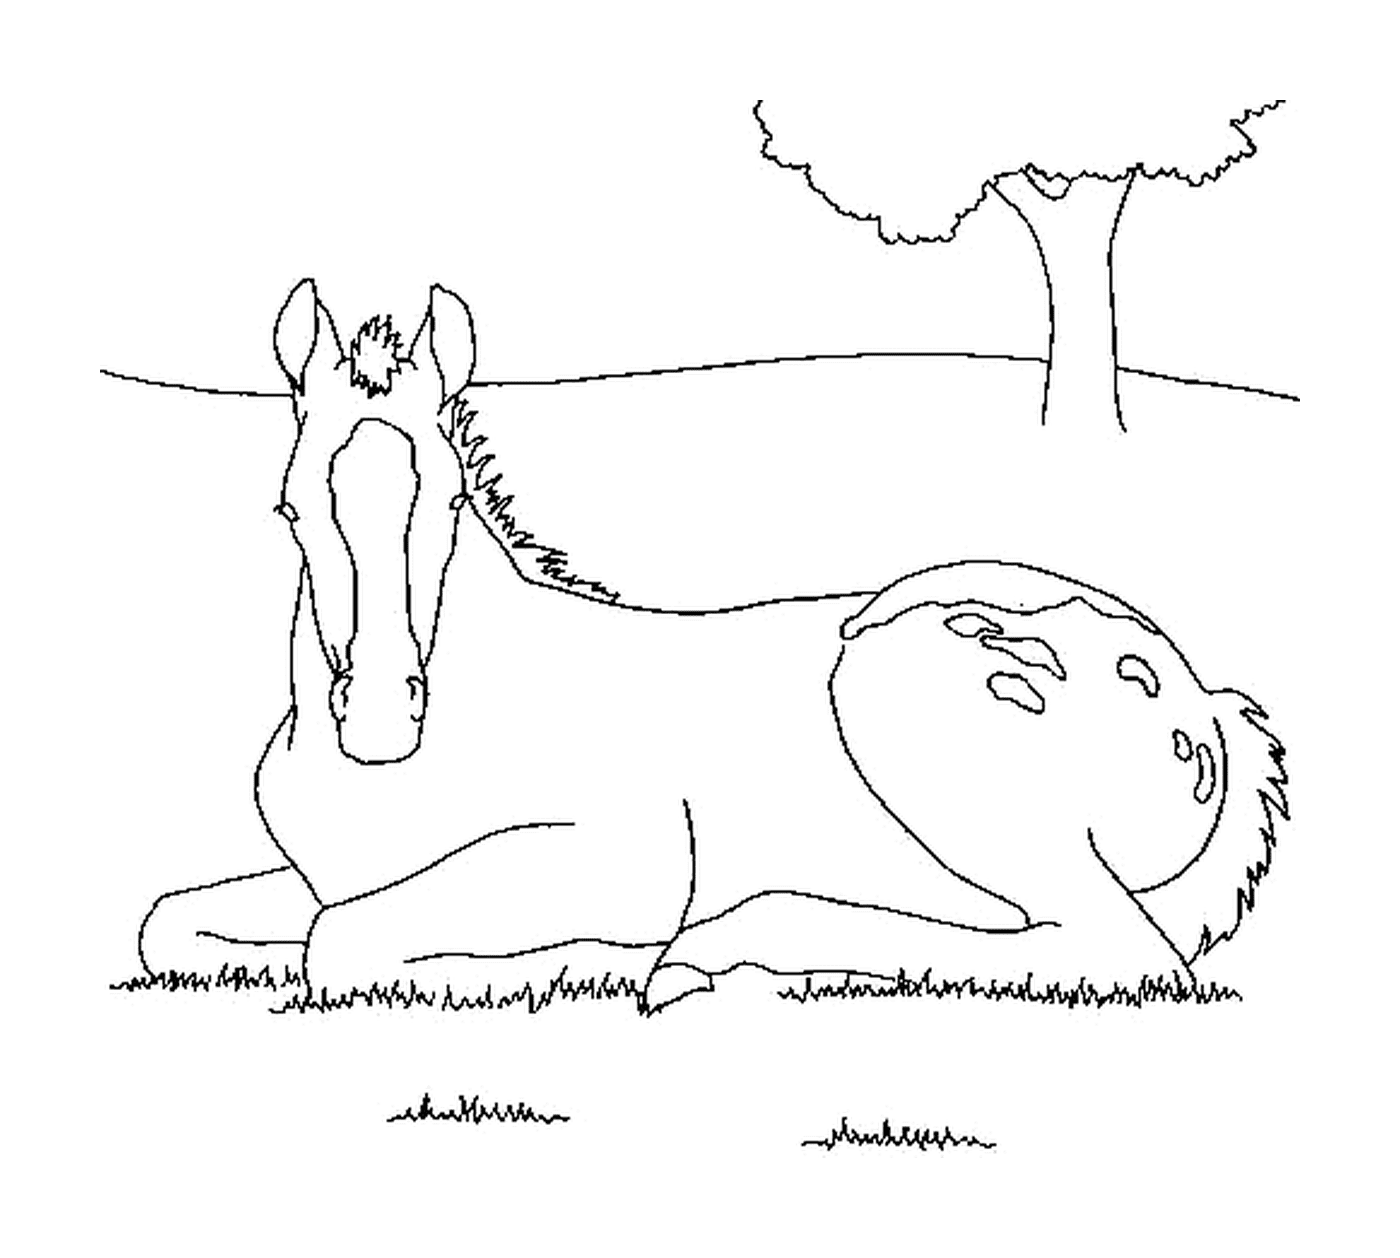  Horse comfortably installed in grass 